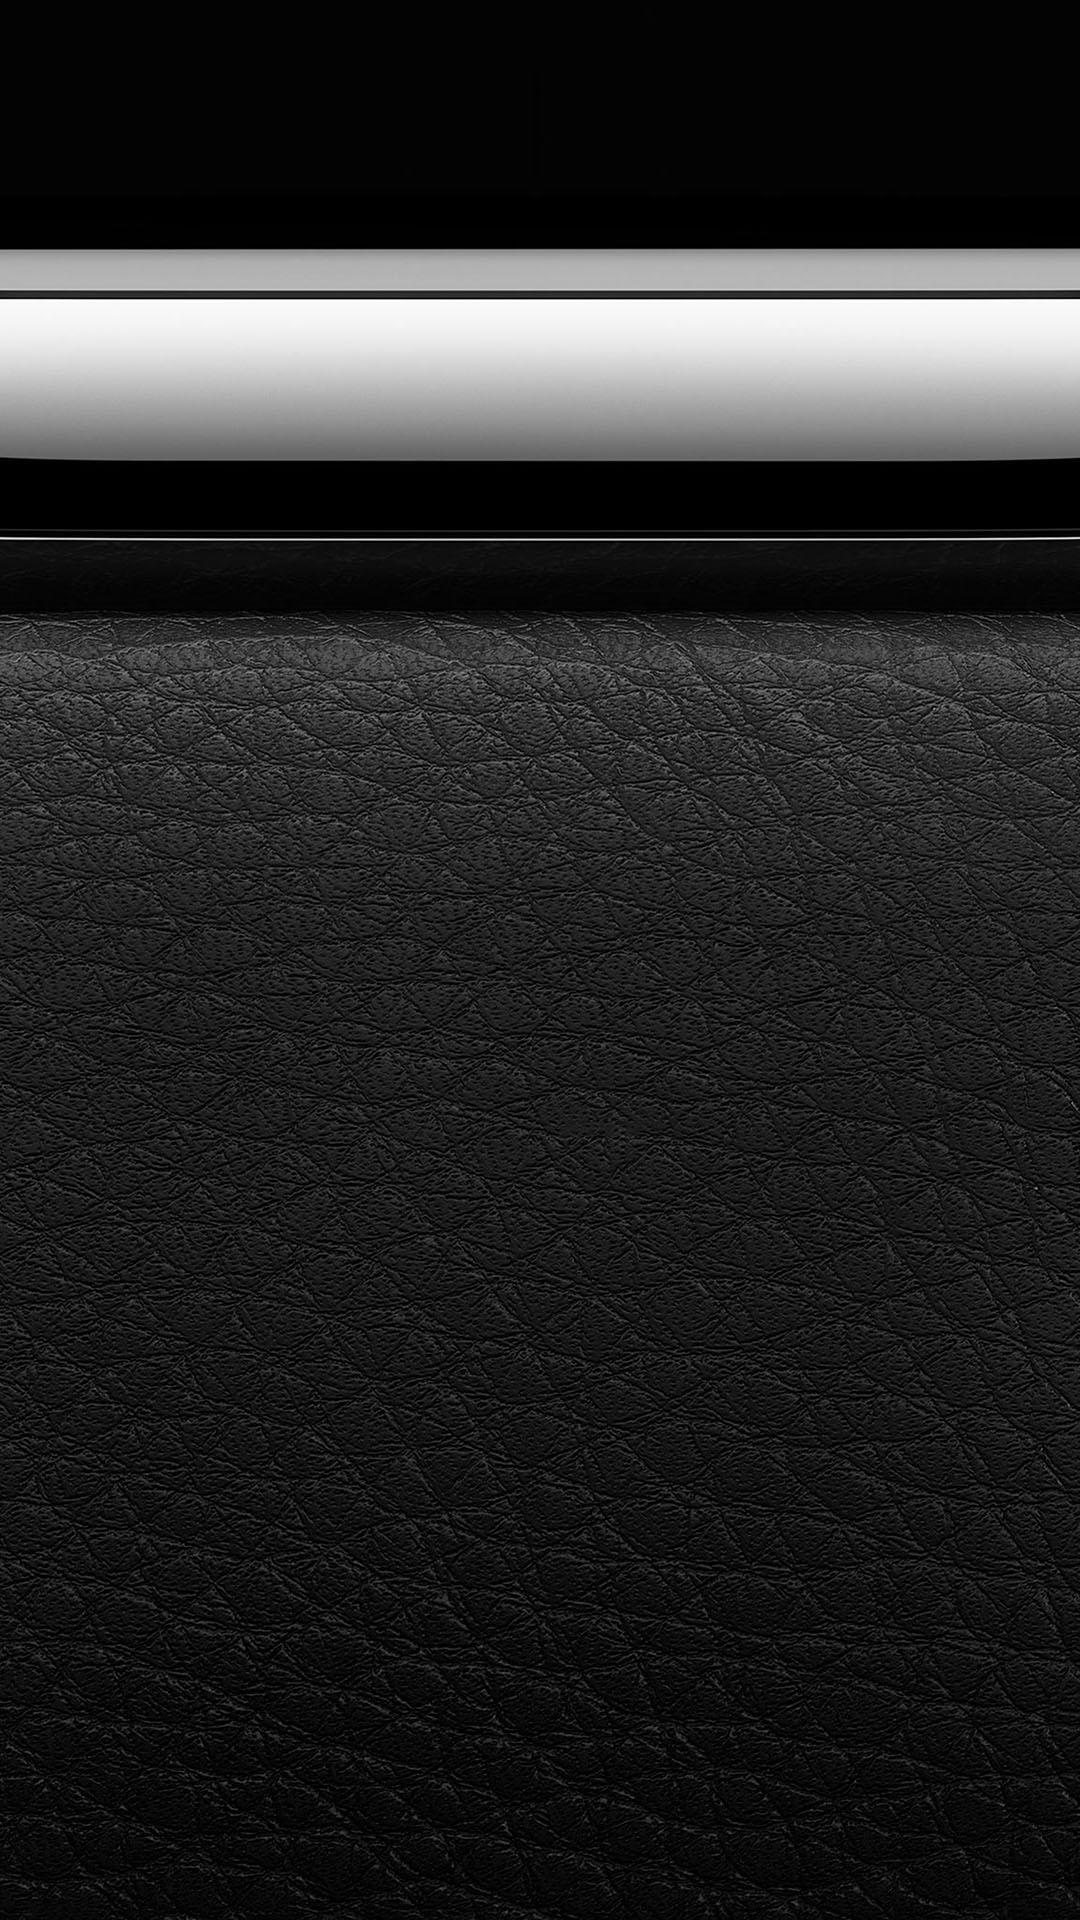 Apple Watch Leather Band Detail Android Wallpaper free download